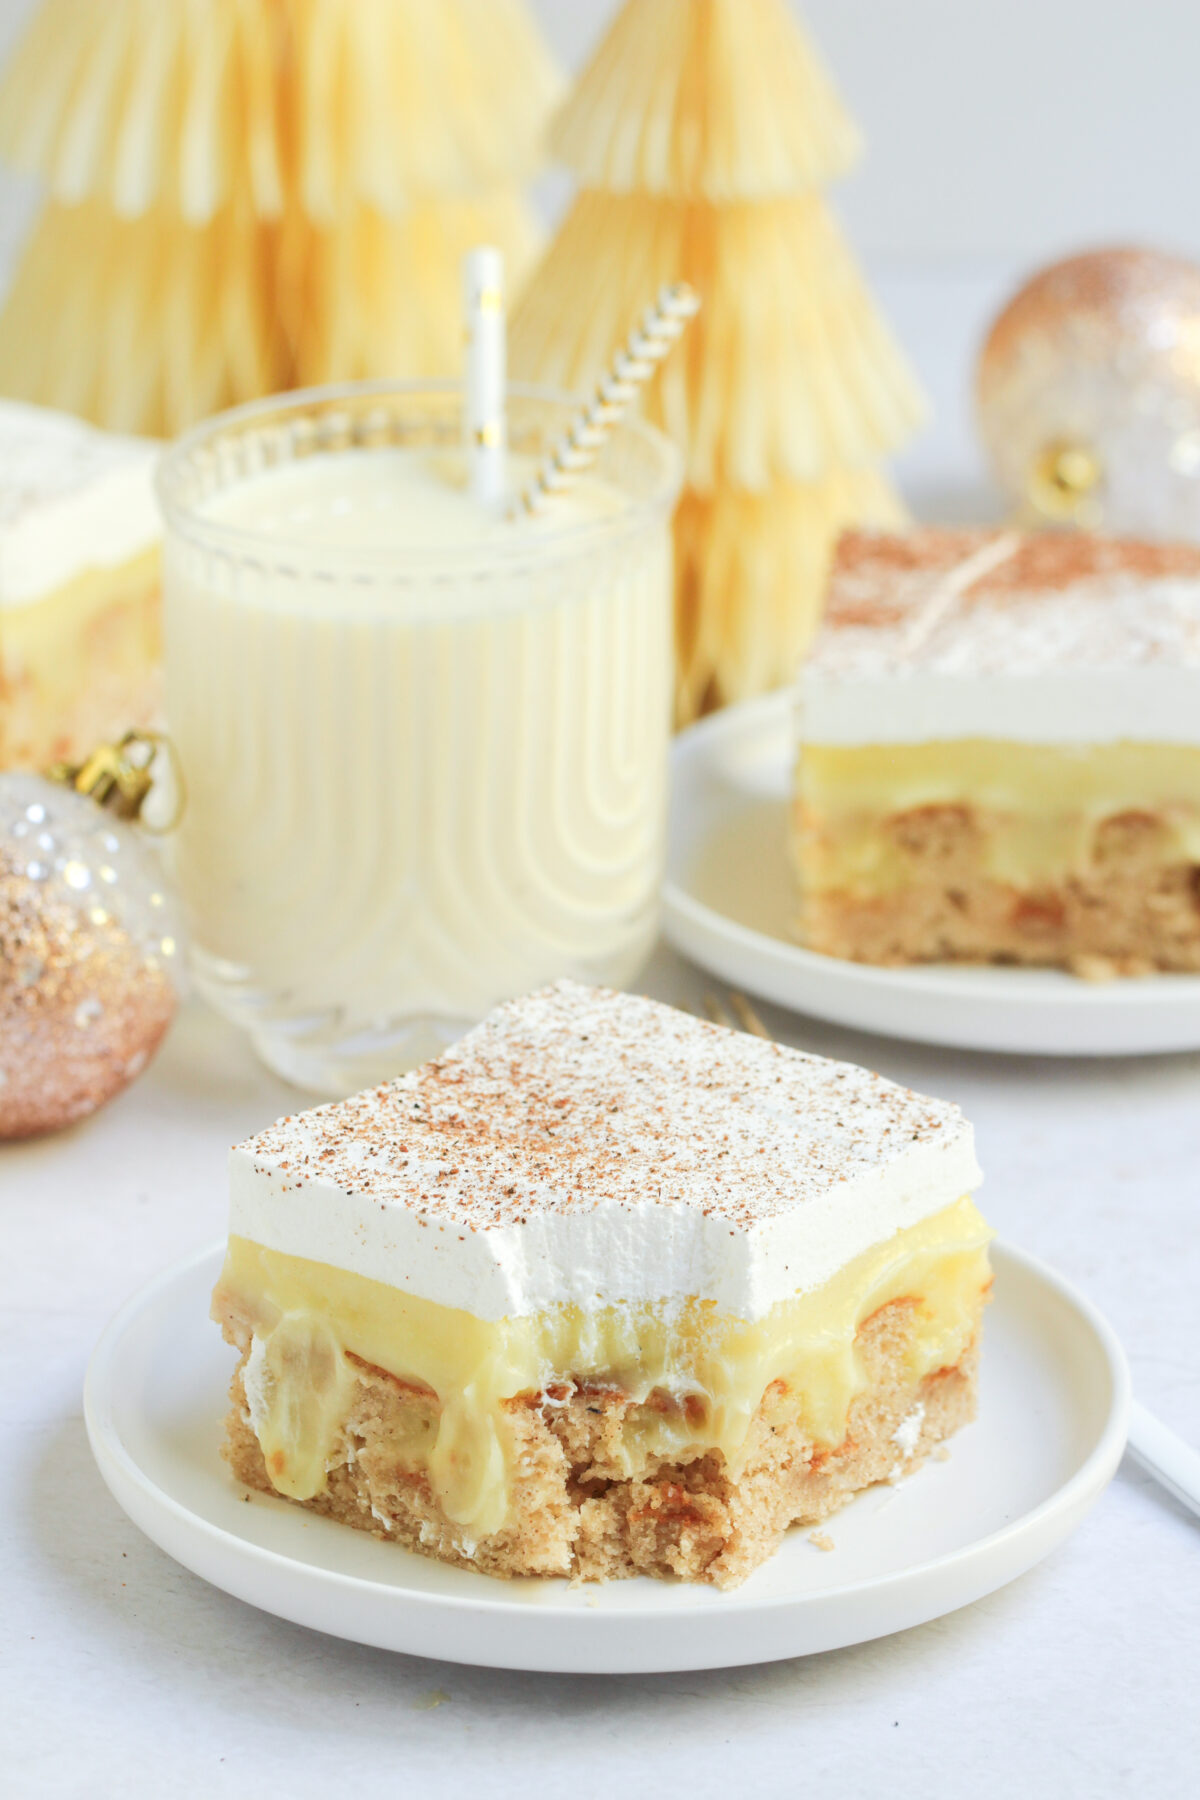 Celebrate the holidays with this eggnog poke cake topped with a creamy eggnog pudding filling and whipped topping dusted with nutmeg.